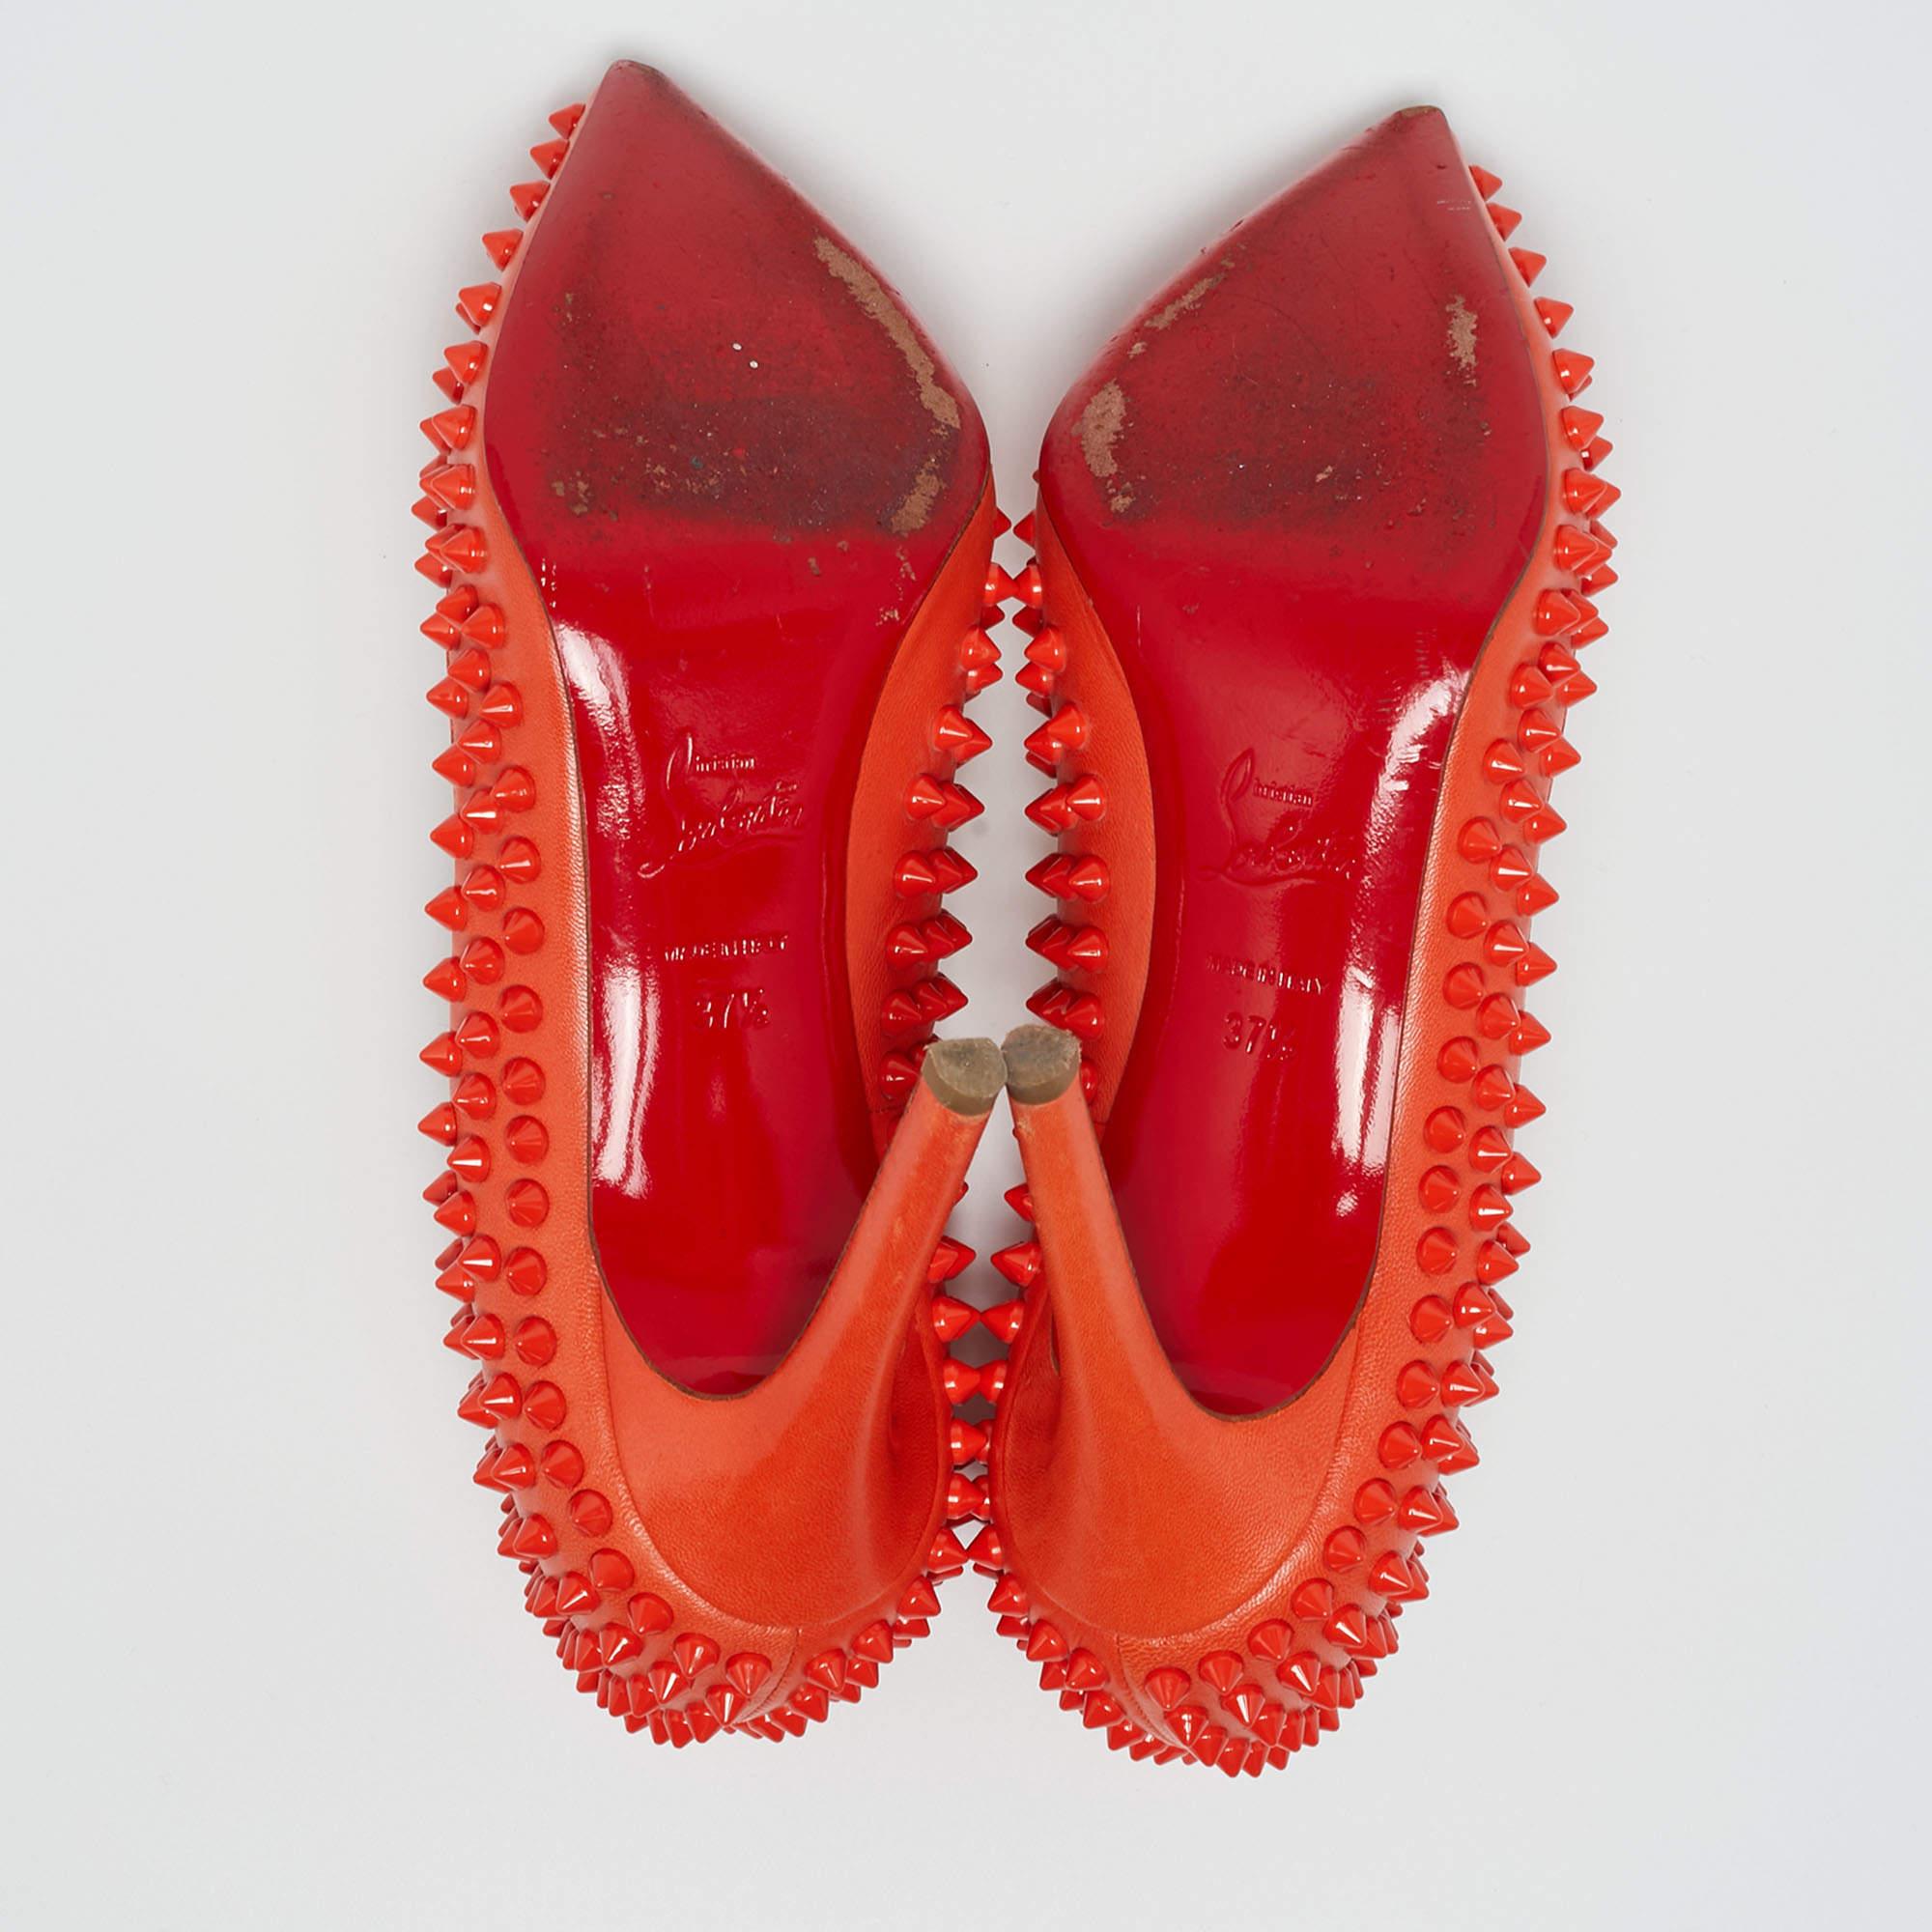 Christian Louboutin Orange Leather Pigalle Spikes Pumps Size 37.5 2